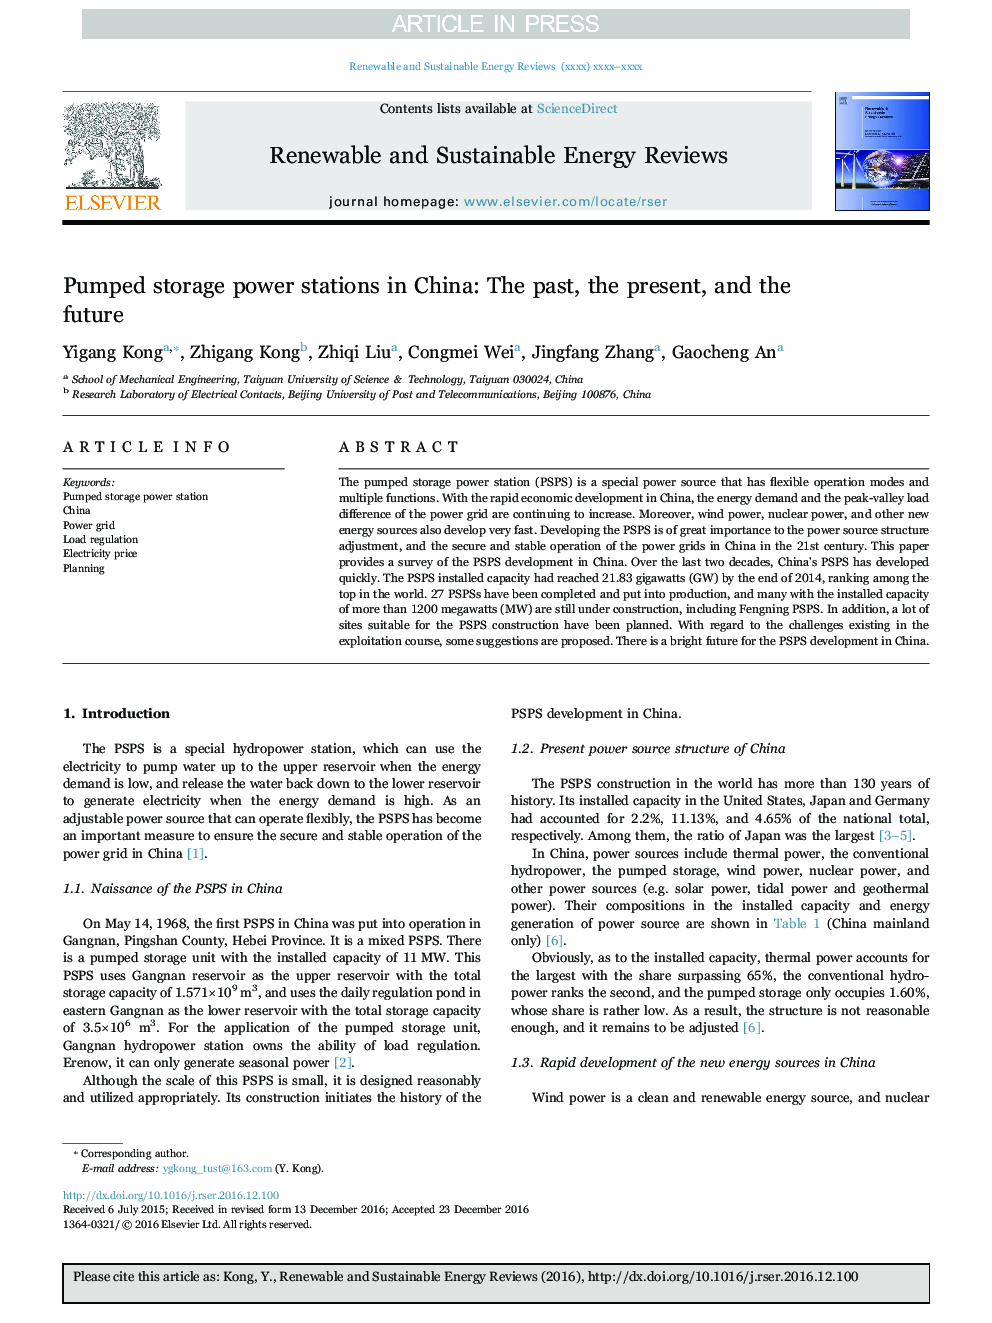 Pumped storage power stations in China: The past, the present, and the future